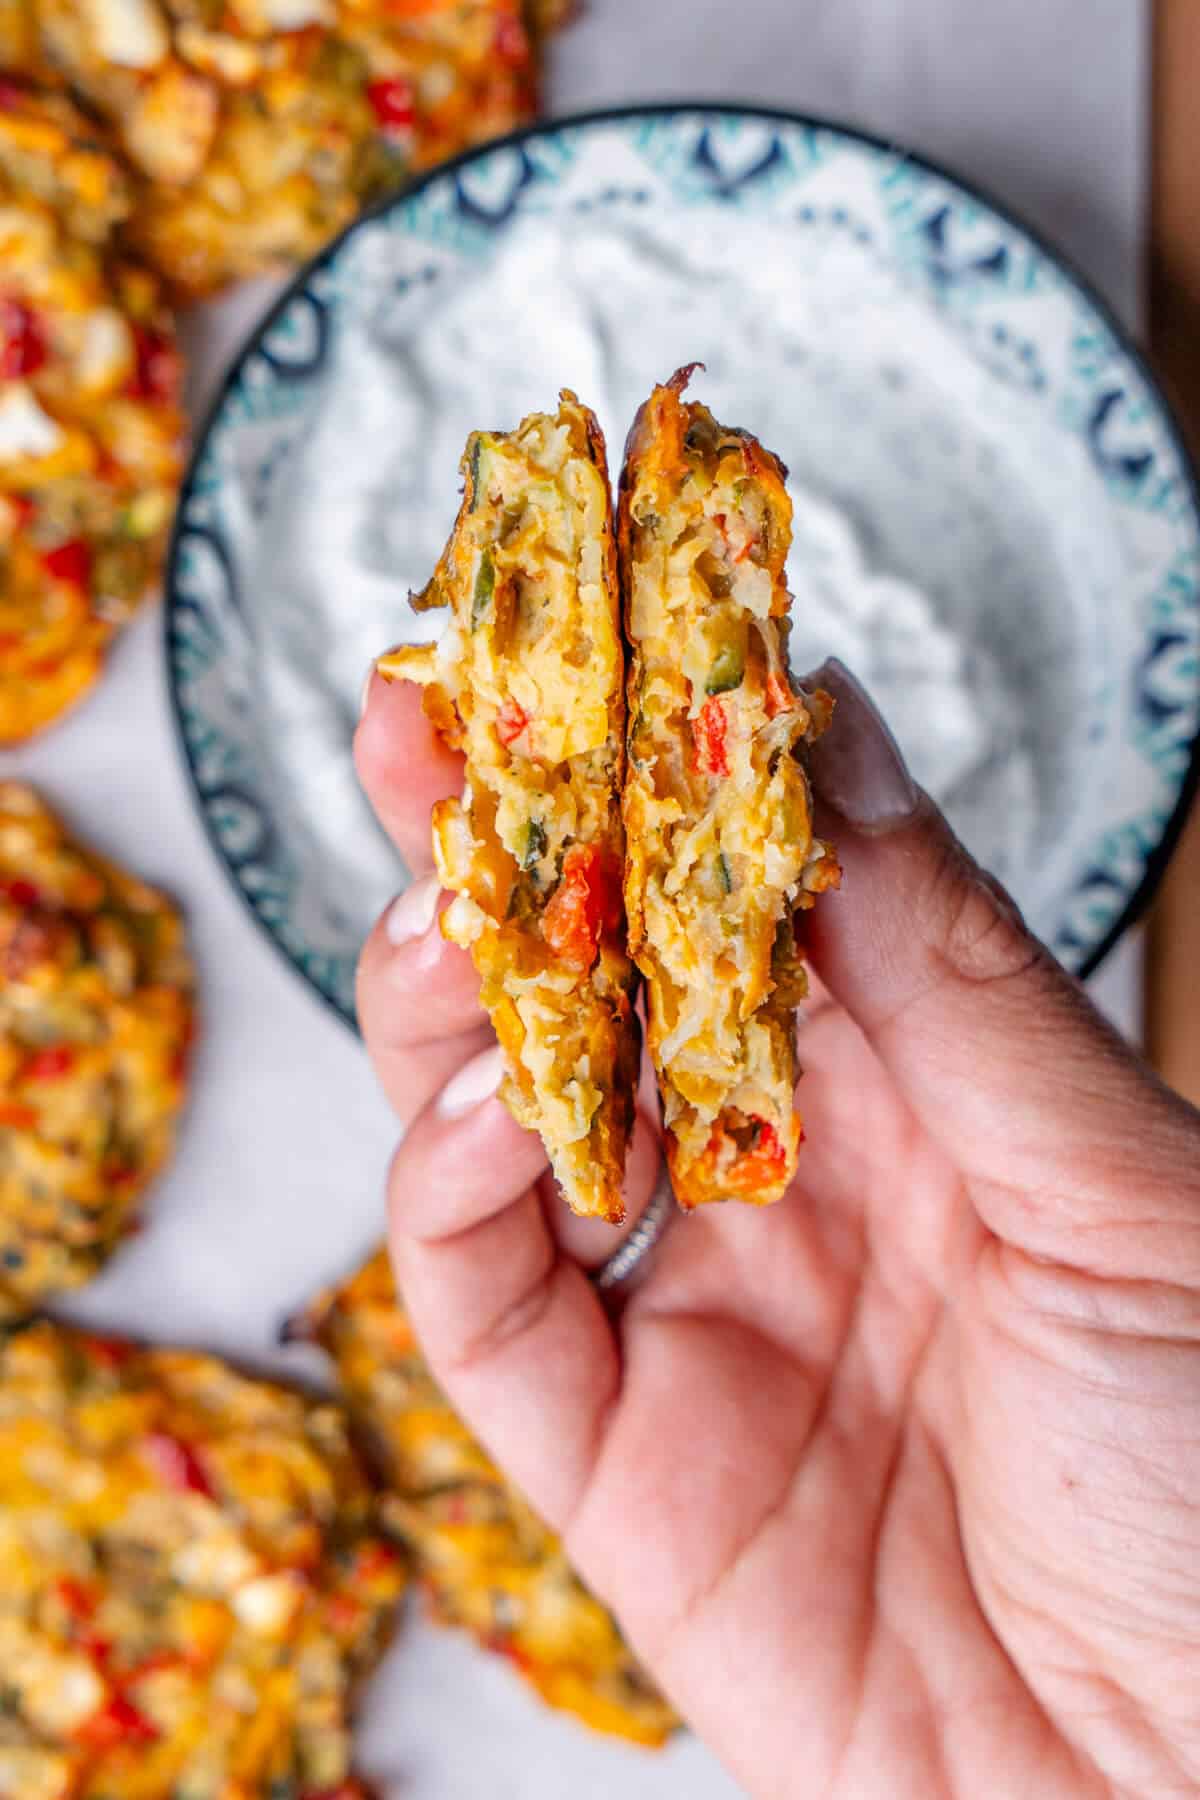 vegetable fritter ripped in half to show the inside